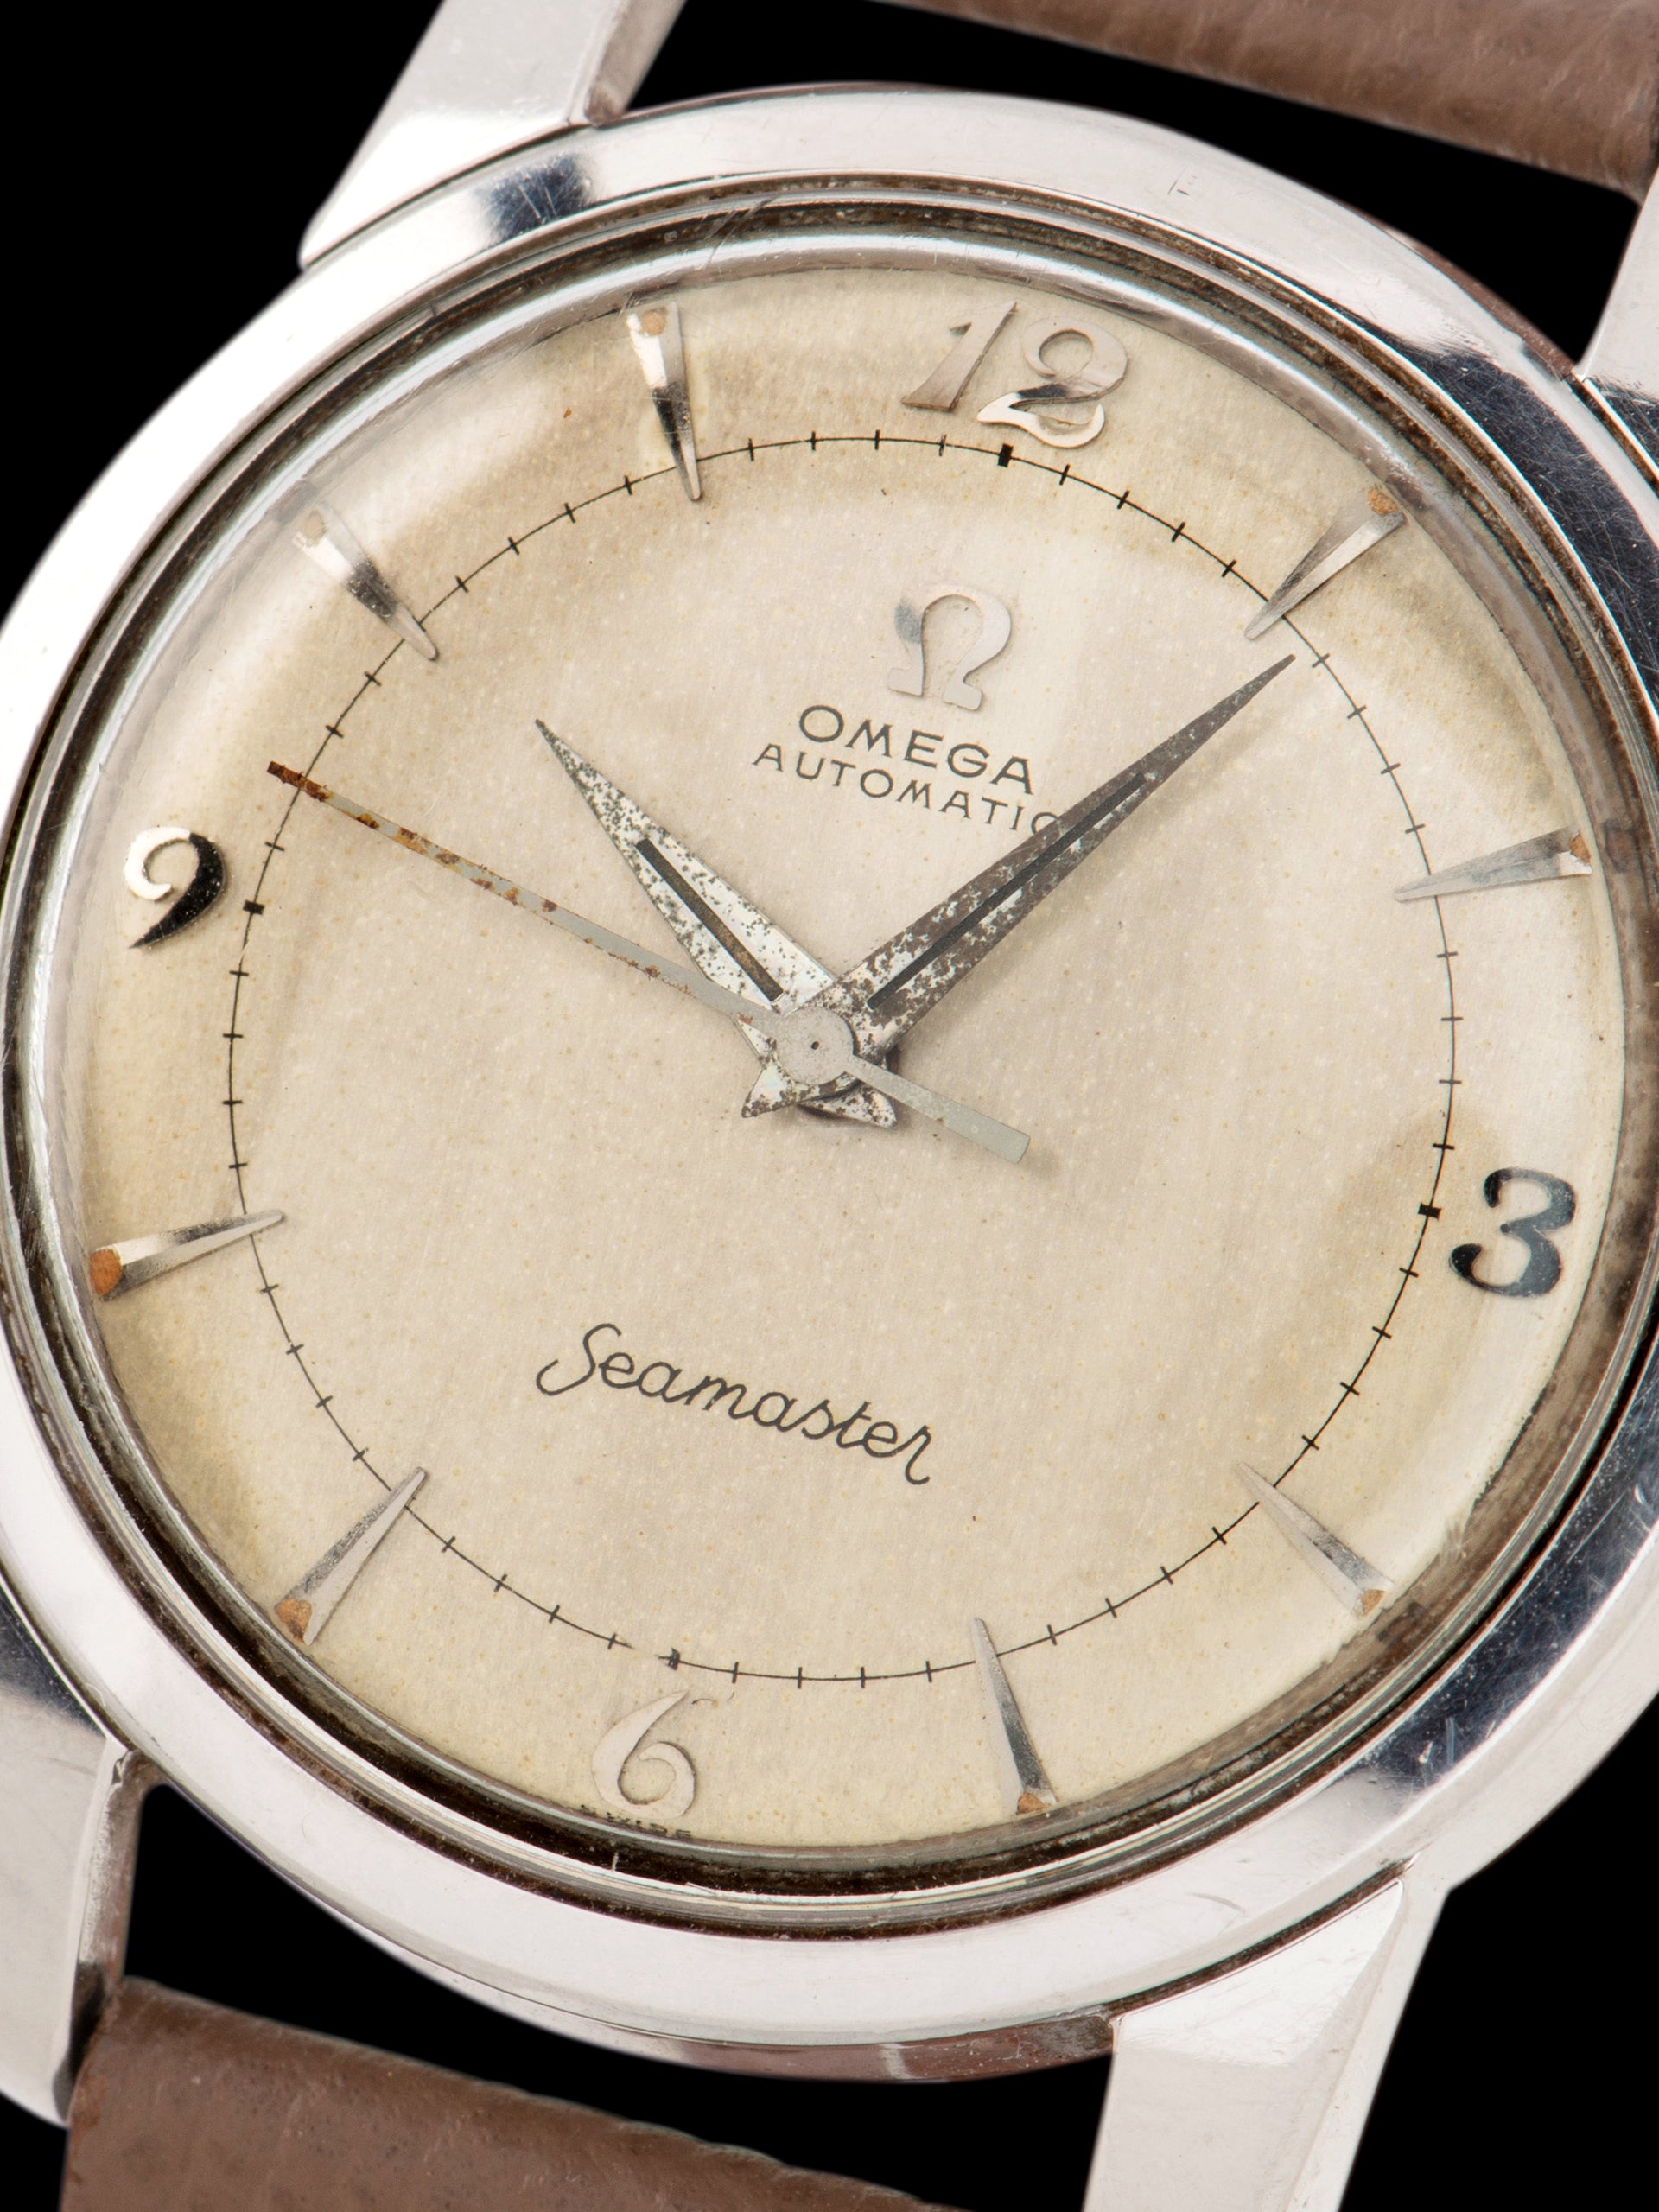 c.1954 - Omega Seamaster Automatic - Model Ref: 2846-2848-1SC - On Bea –  Vintage Watch Specialist